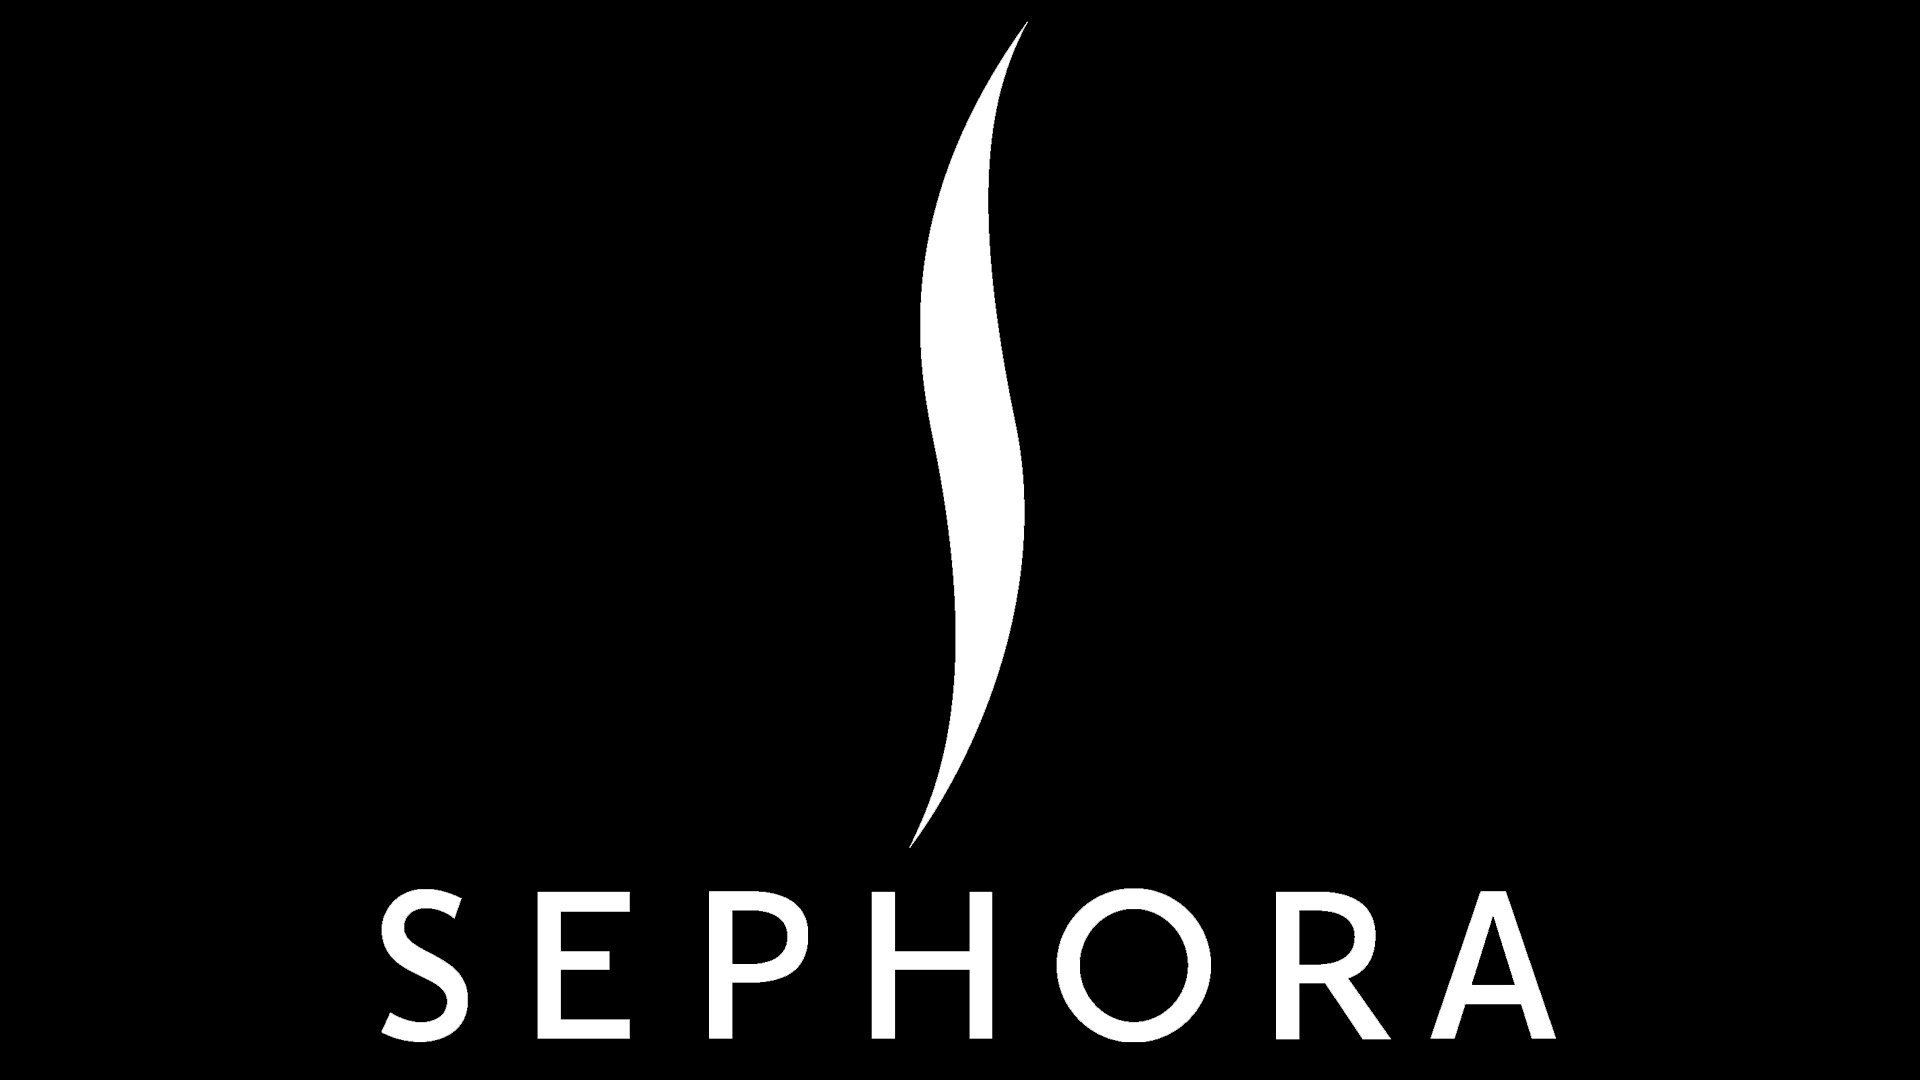 Get Your Sephora Order with Same-Day Delivery from Getcho